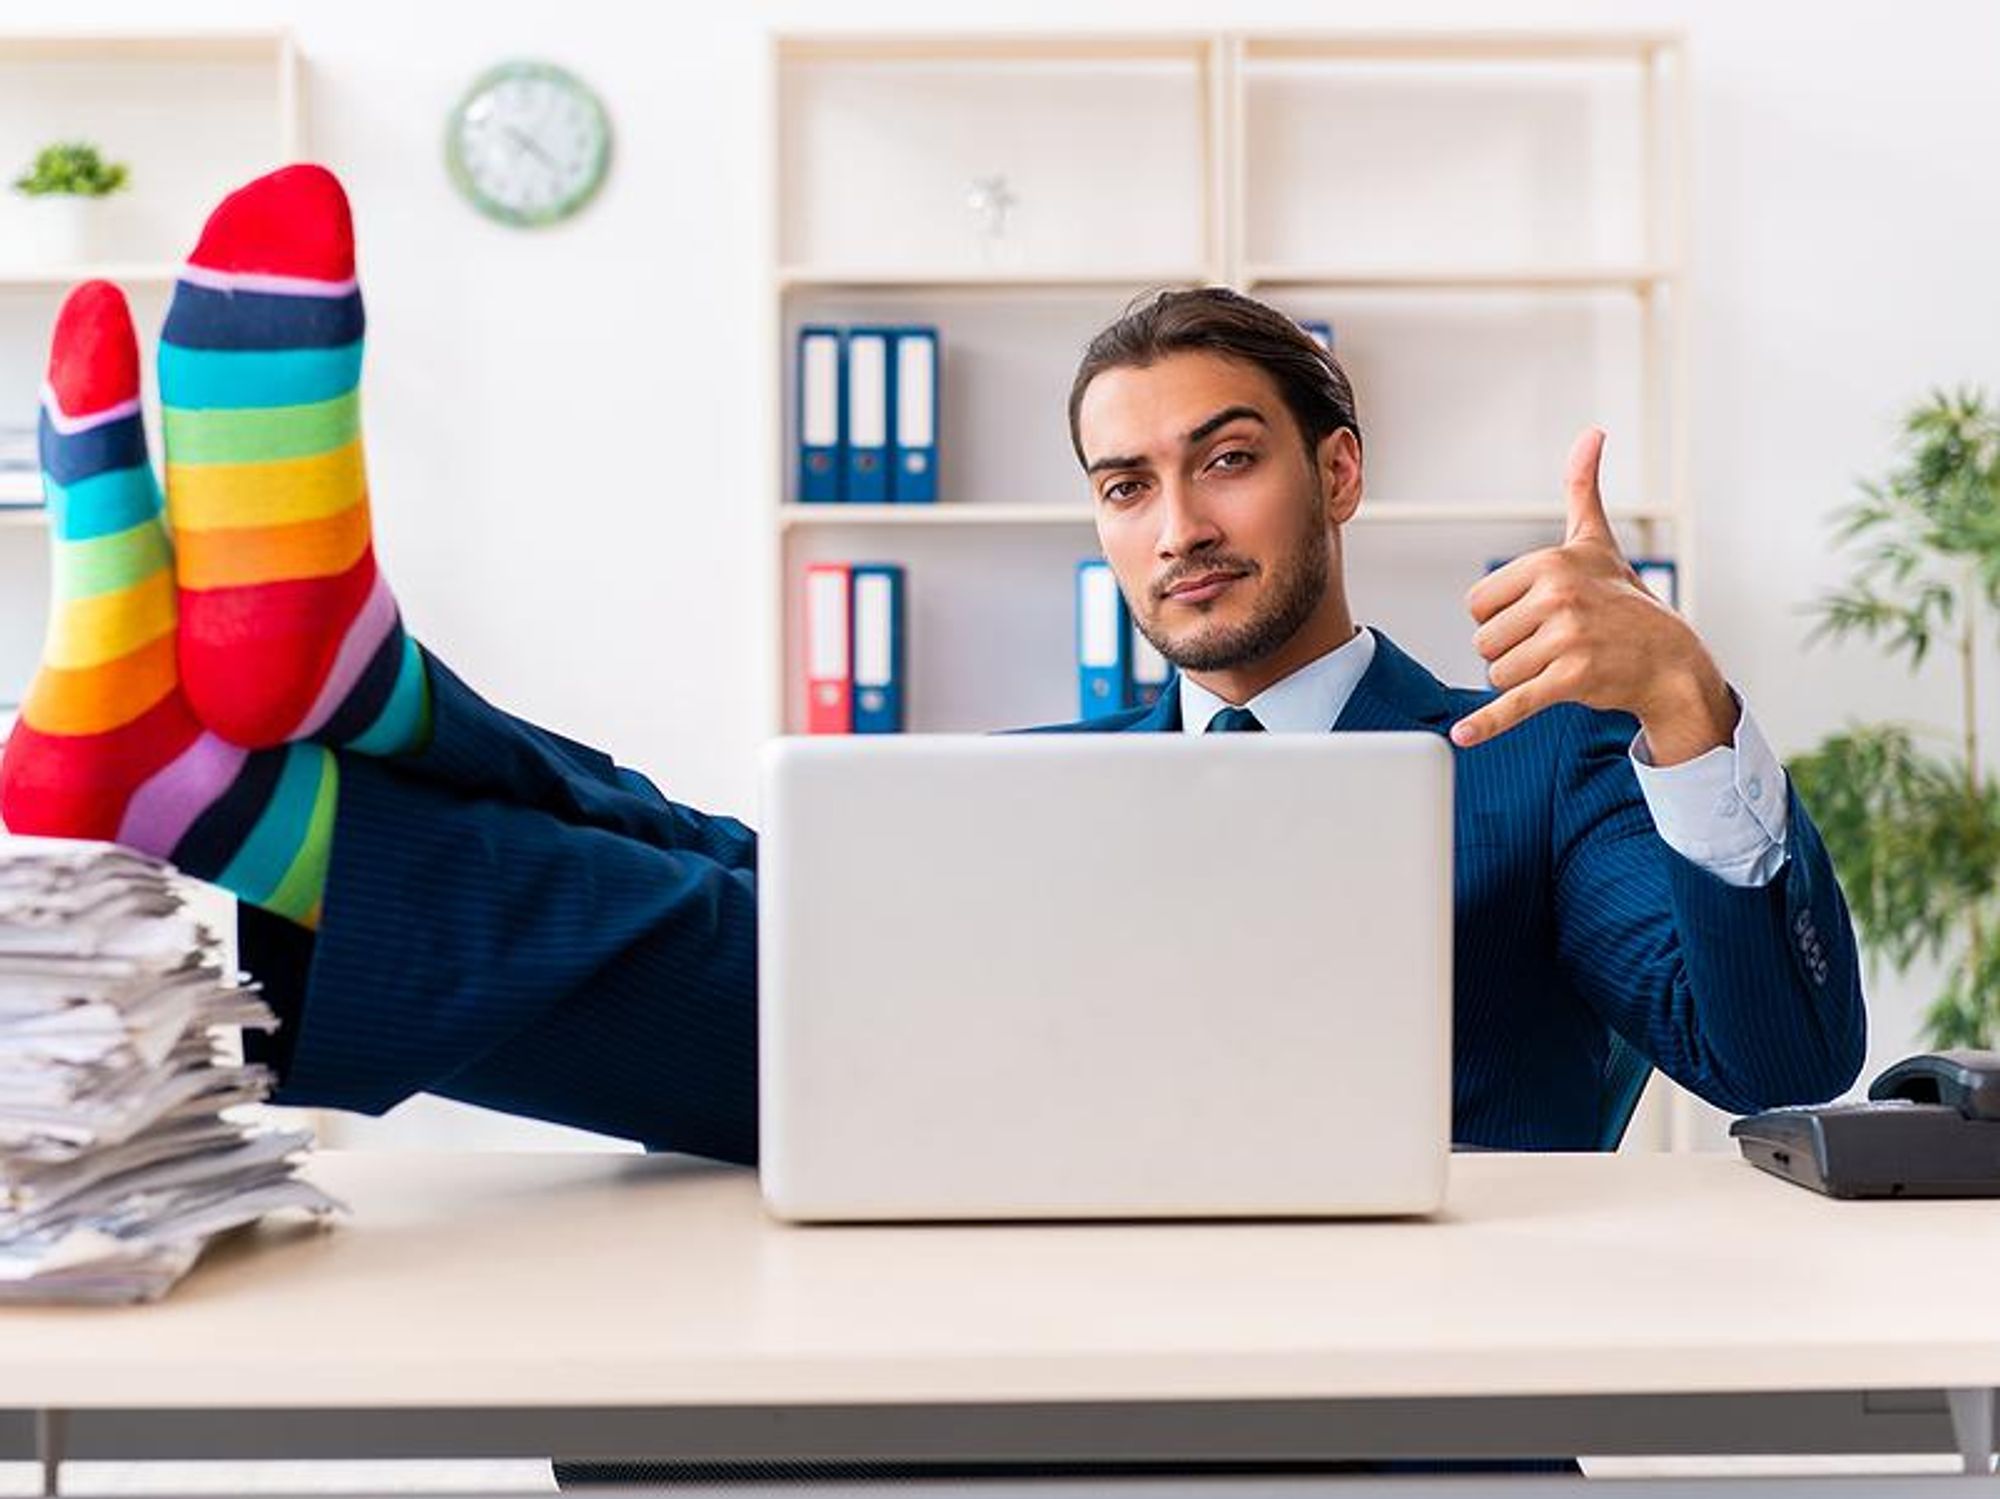 A businessman shows his support for the LGBTQ+ community while at the office.